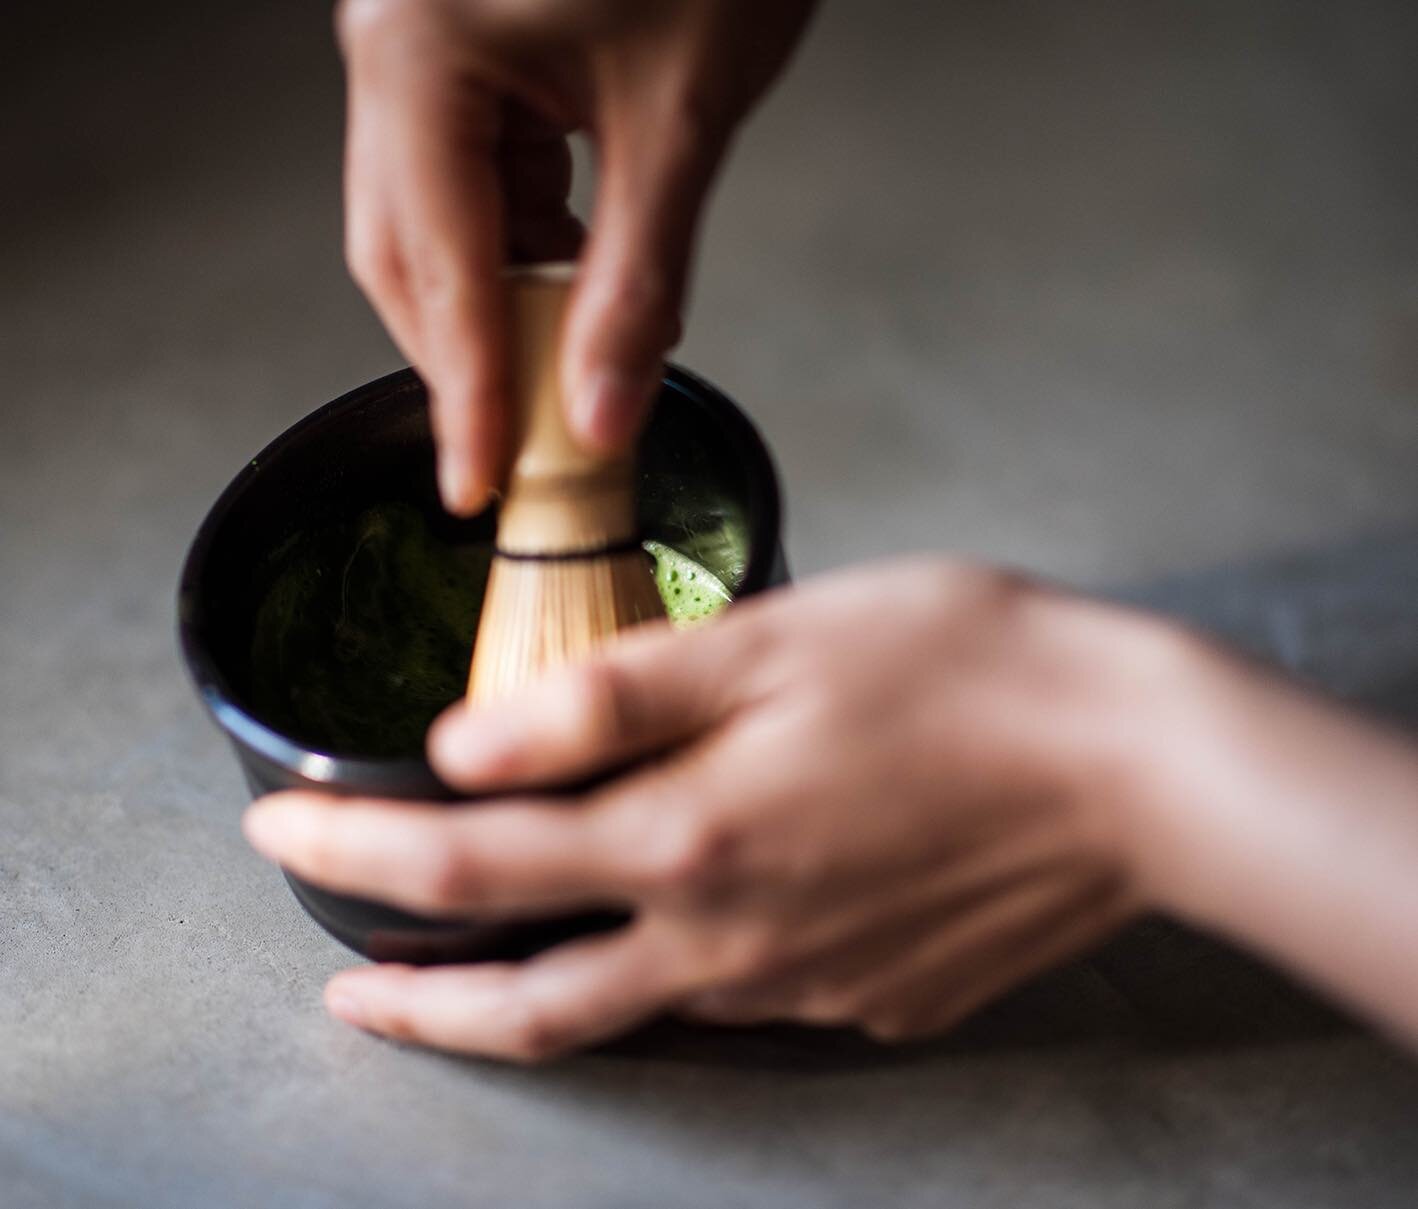 As the weather gets cooler, we&rsquo;re whisking more matcha to start the day. 
Usucha (thin) matcha is a simple, everyday way to prepare matcha with just matcha + water + bamboo whisk. Instructions are on our website under matcha. Enjoy! 🌿

#matcha